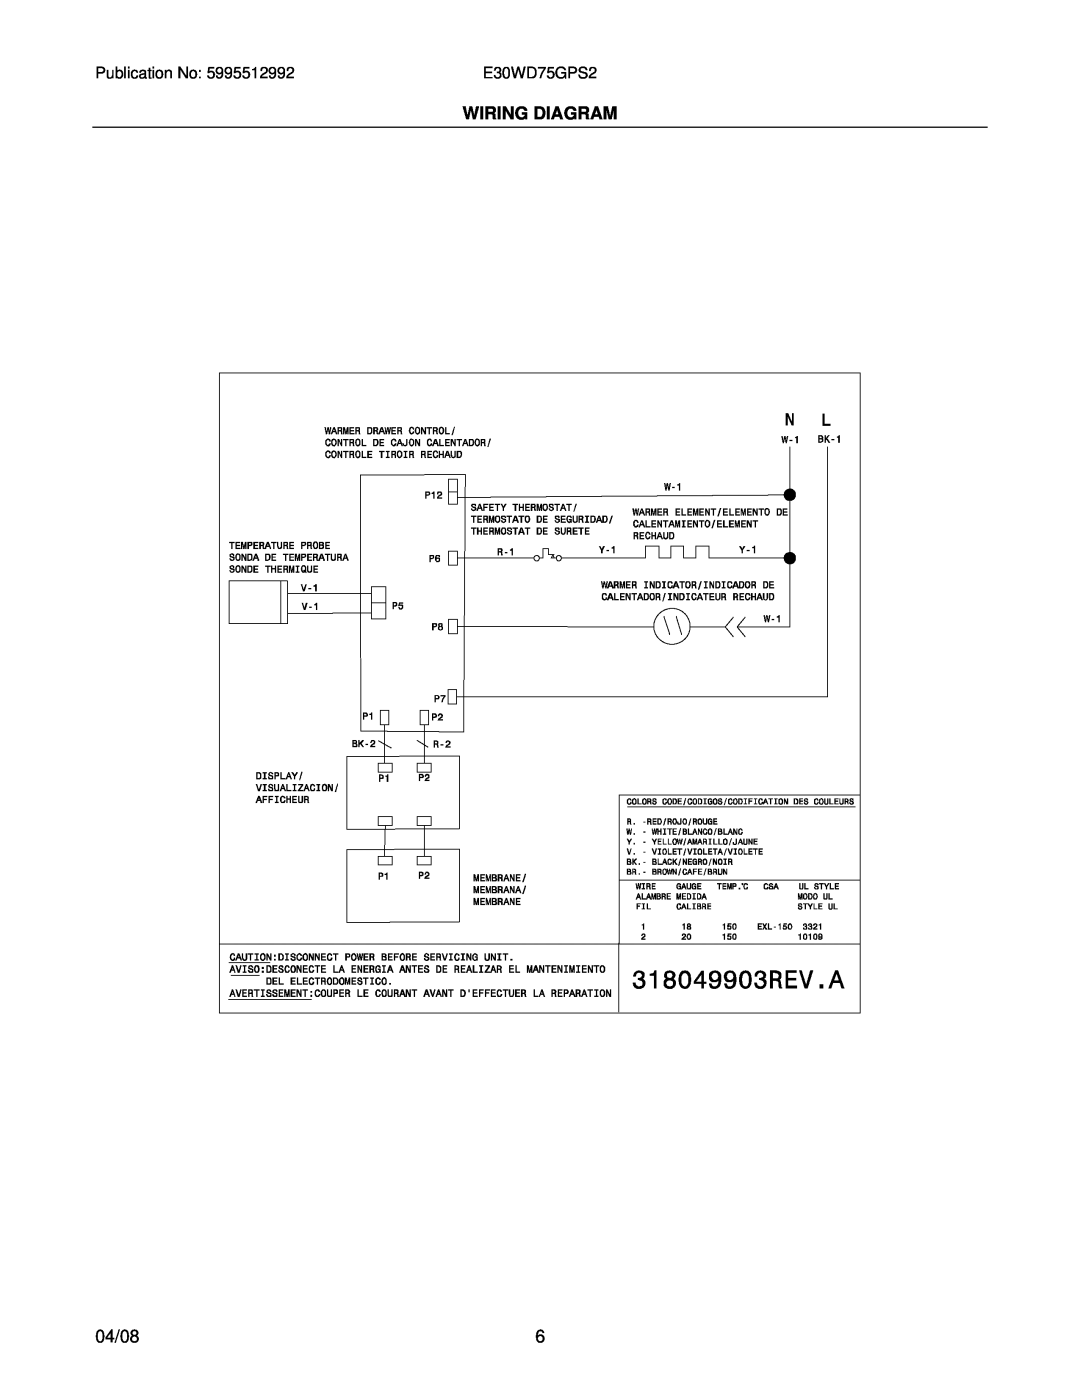 Electrolux E30WD75GPS2, 31266300970S2 installation instructions Wiring Diagram, 04/08 